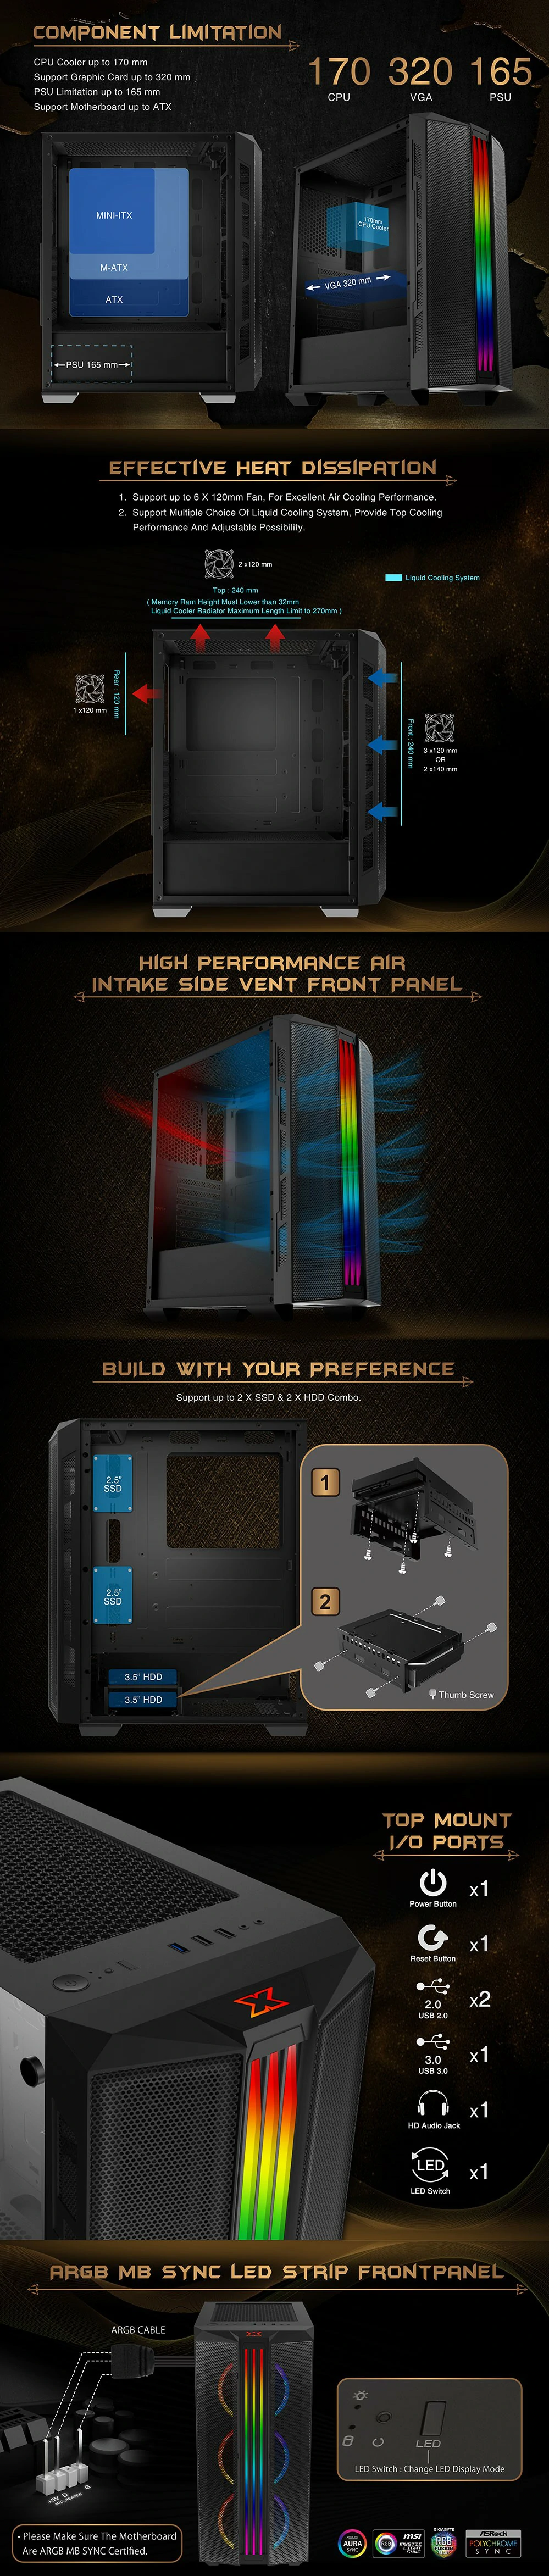 Overview - Xigmatek - Trident - Tempered Glass ARGB Mid Tower Chassis